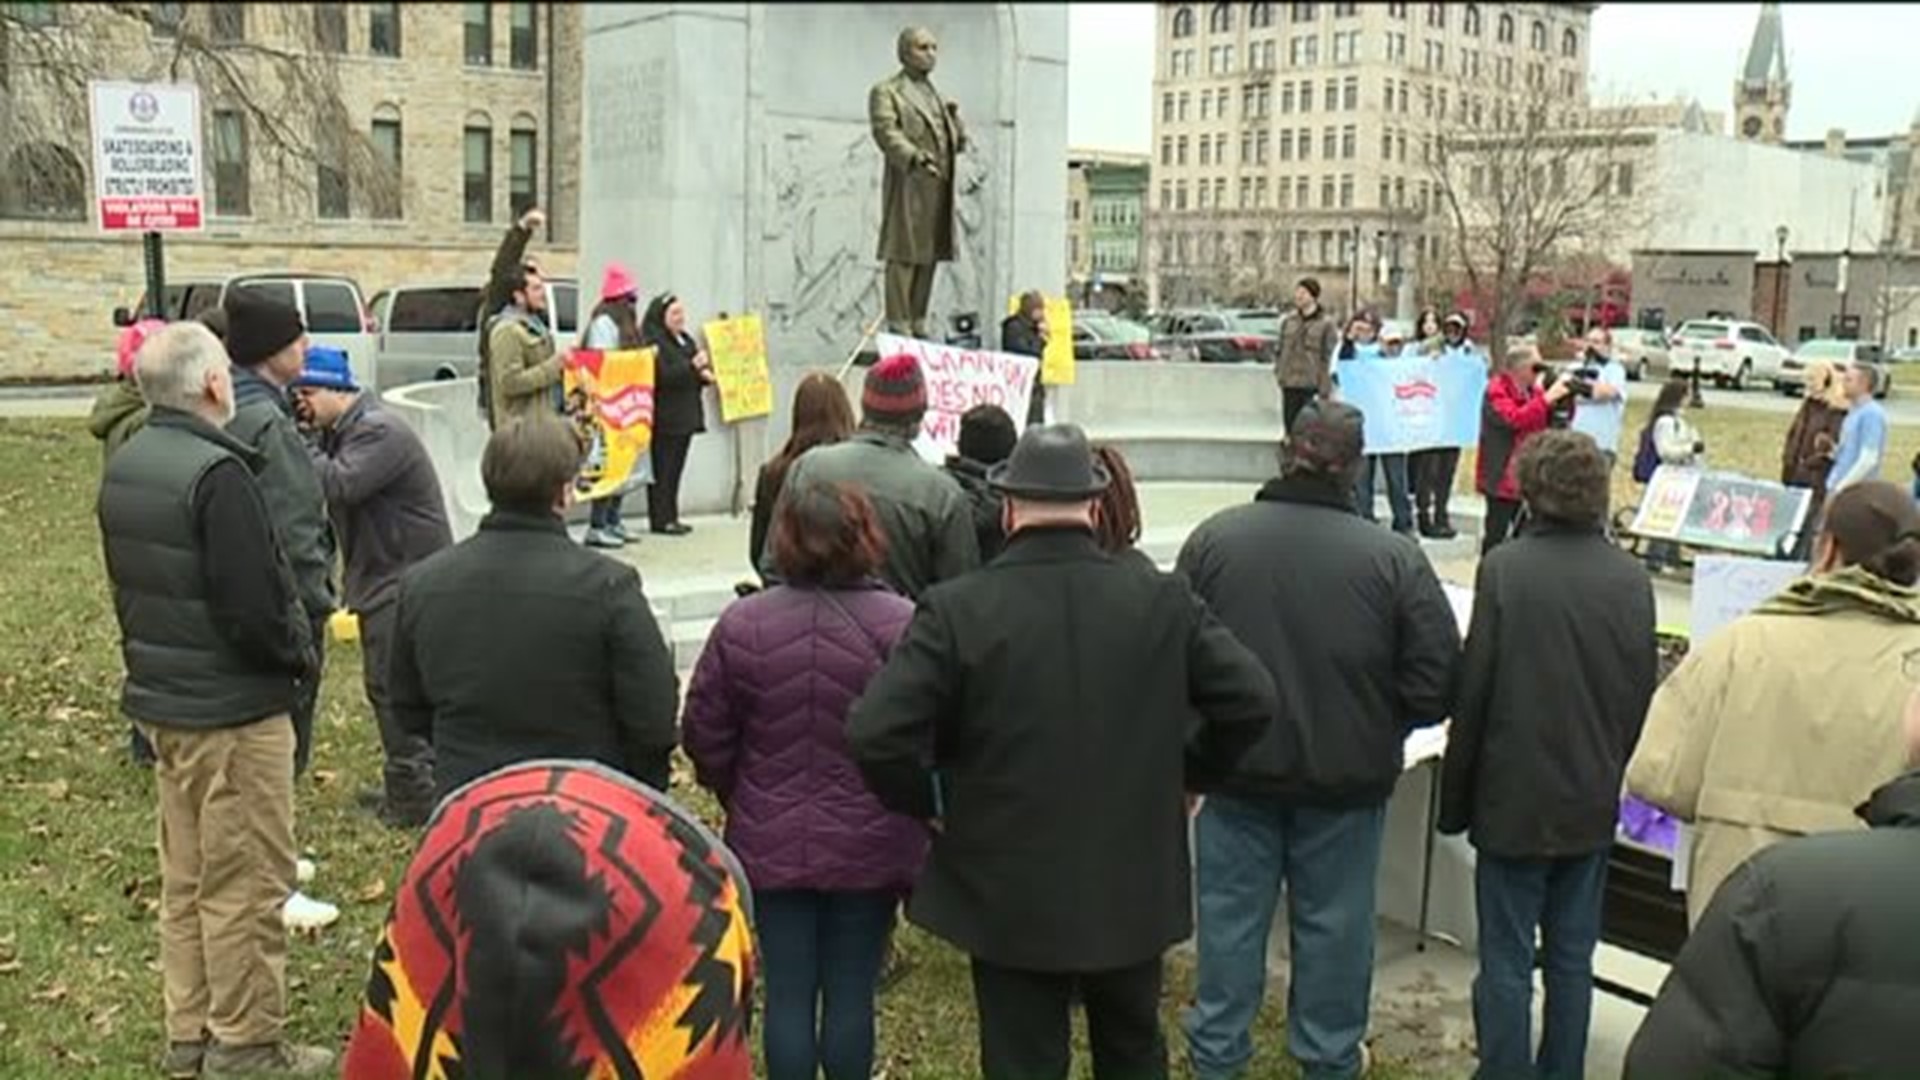 Inauguration Protest Draws Crowd to Courthouse Square